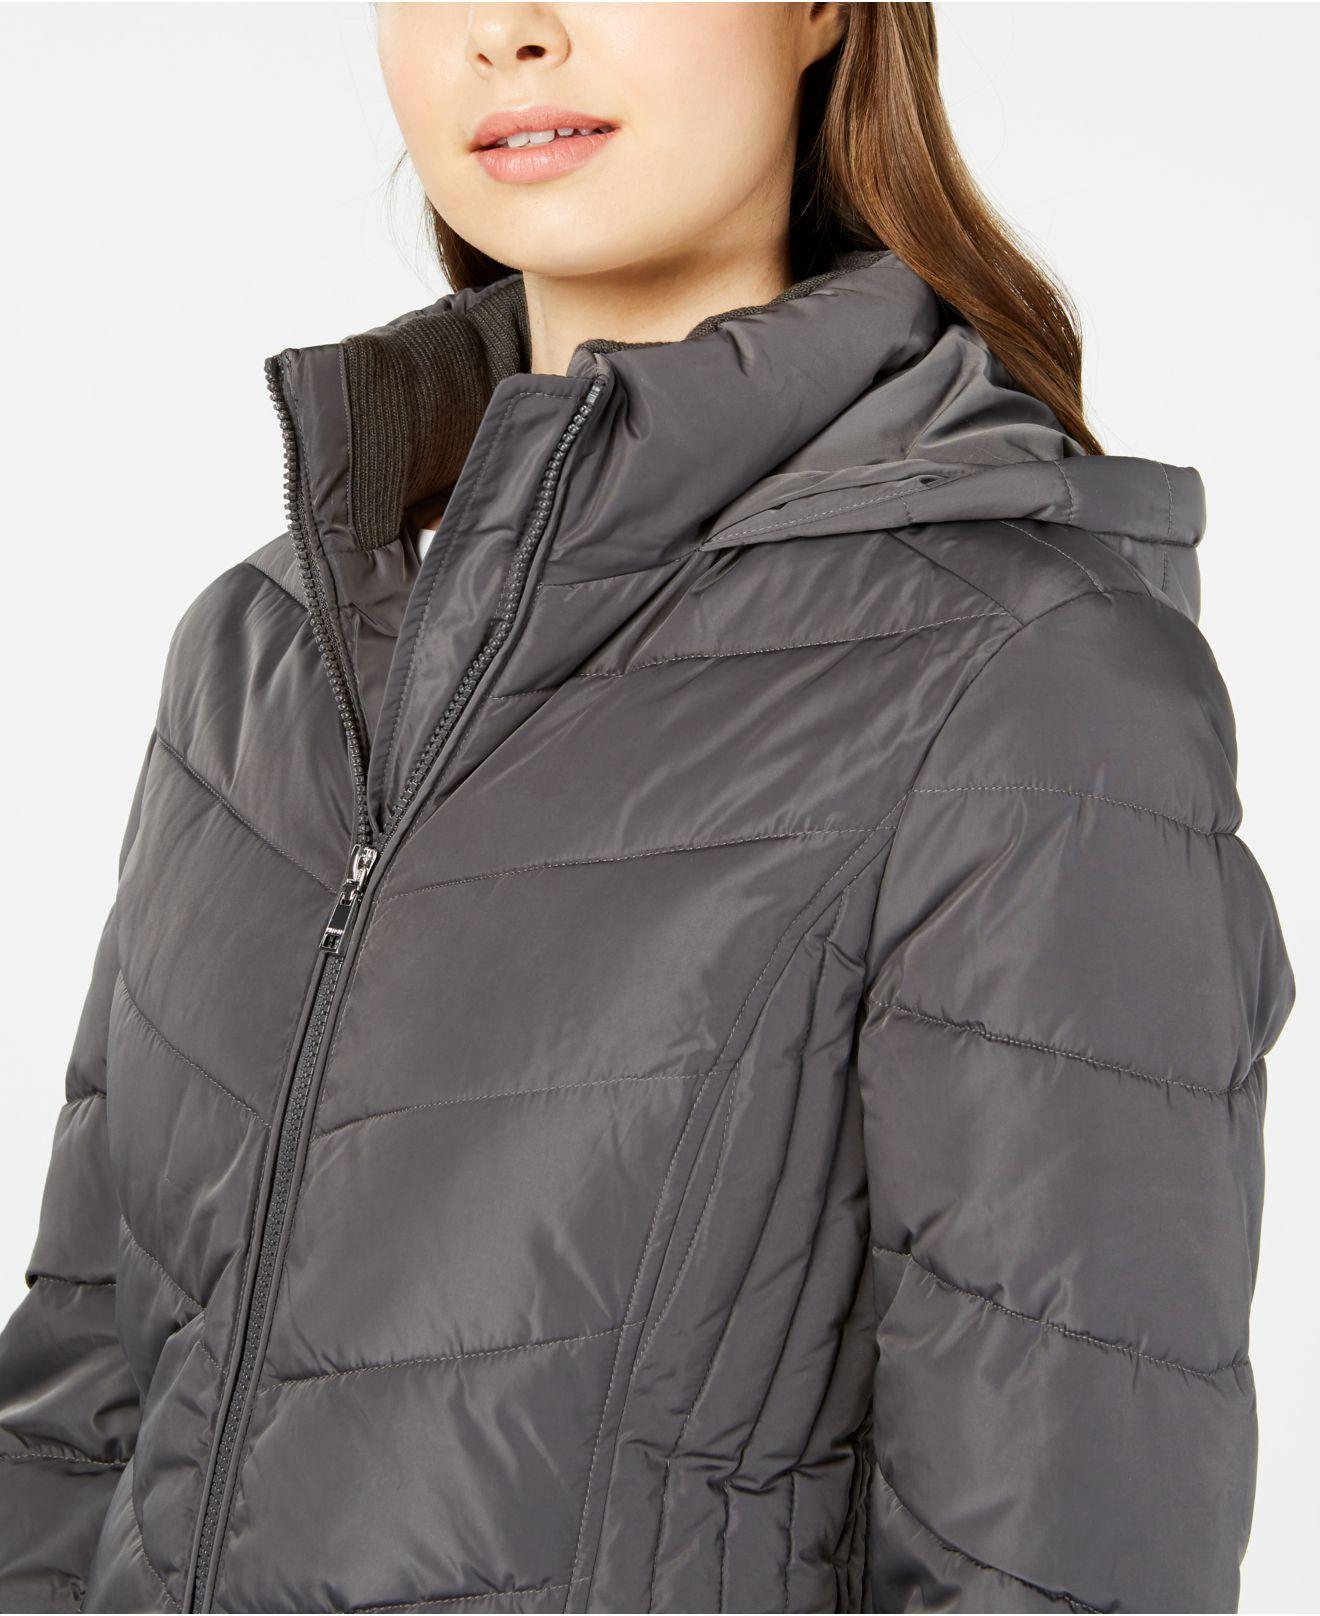 Tommy Hilfiger Chevron Faux-fur Trim Hooded Puffer Coat, Created Macy's in Gray | Lyst